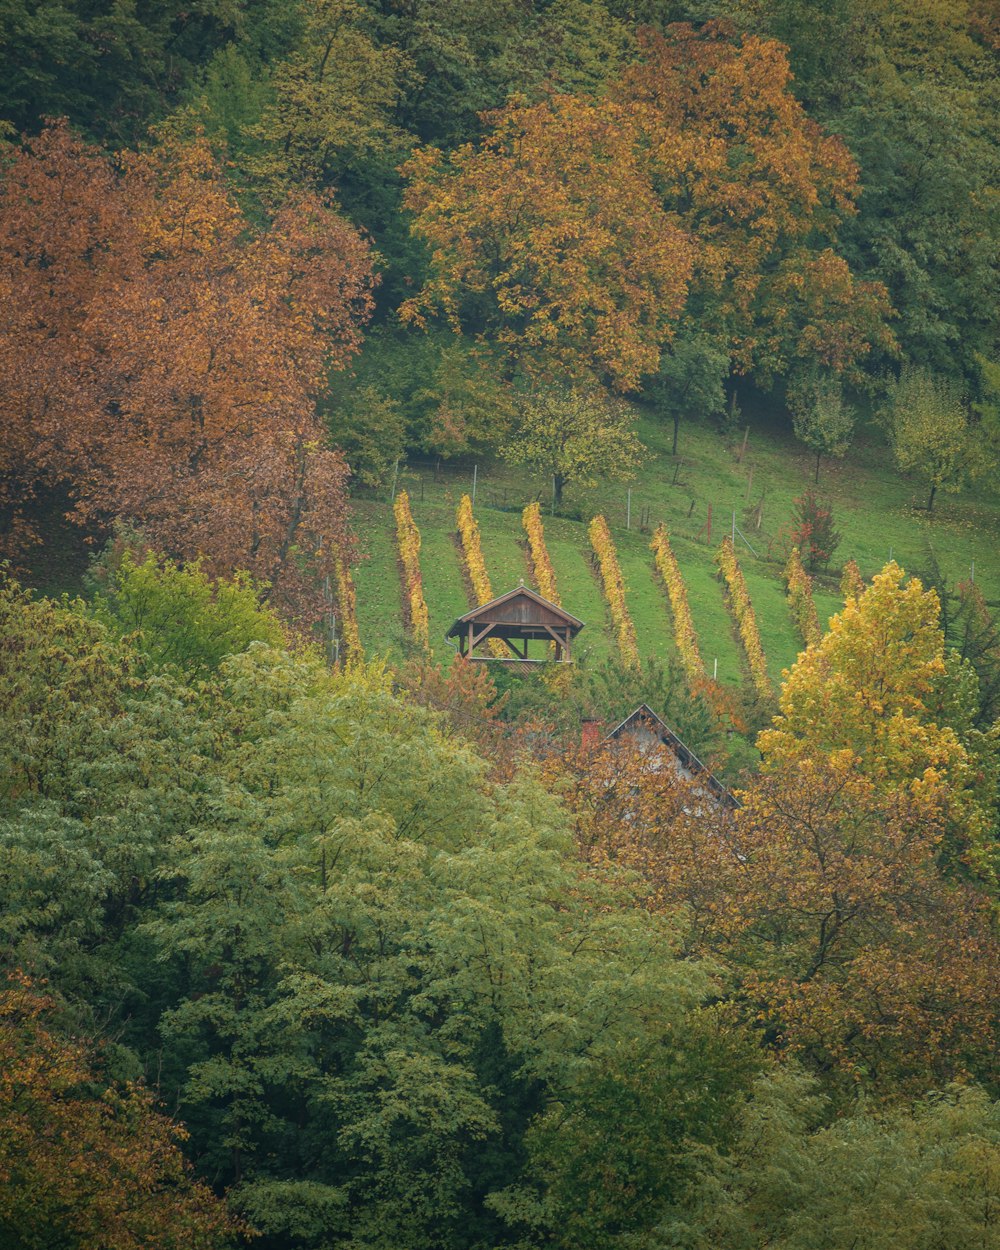 a gazebo in the middle of a field surrounded by trees